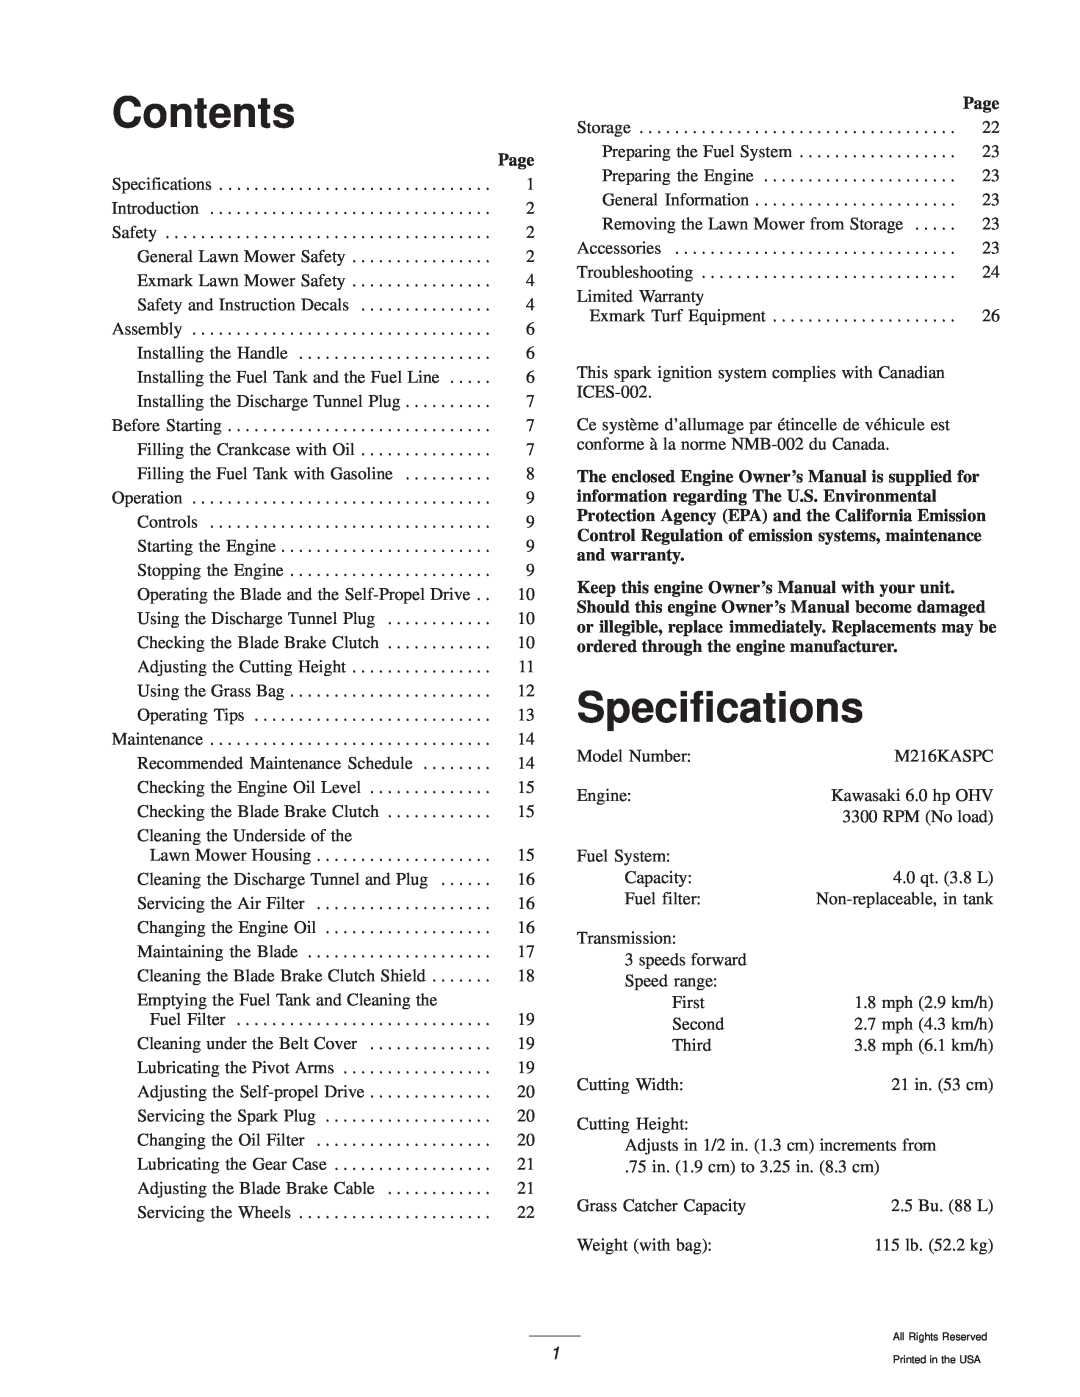 Exmark M216KASPC manual Contents, Specifications, Page 